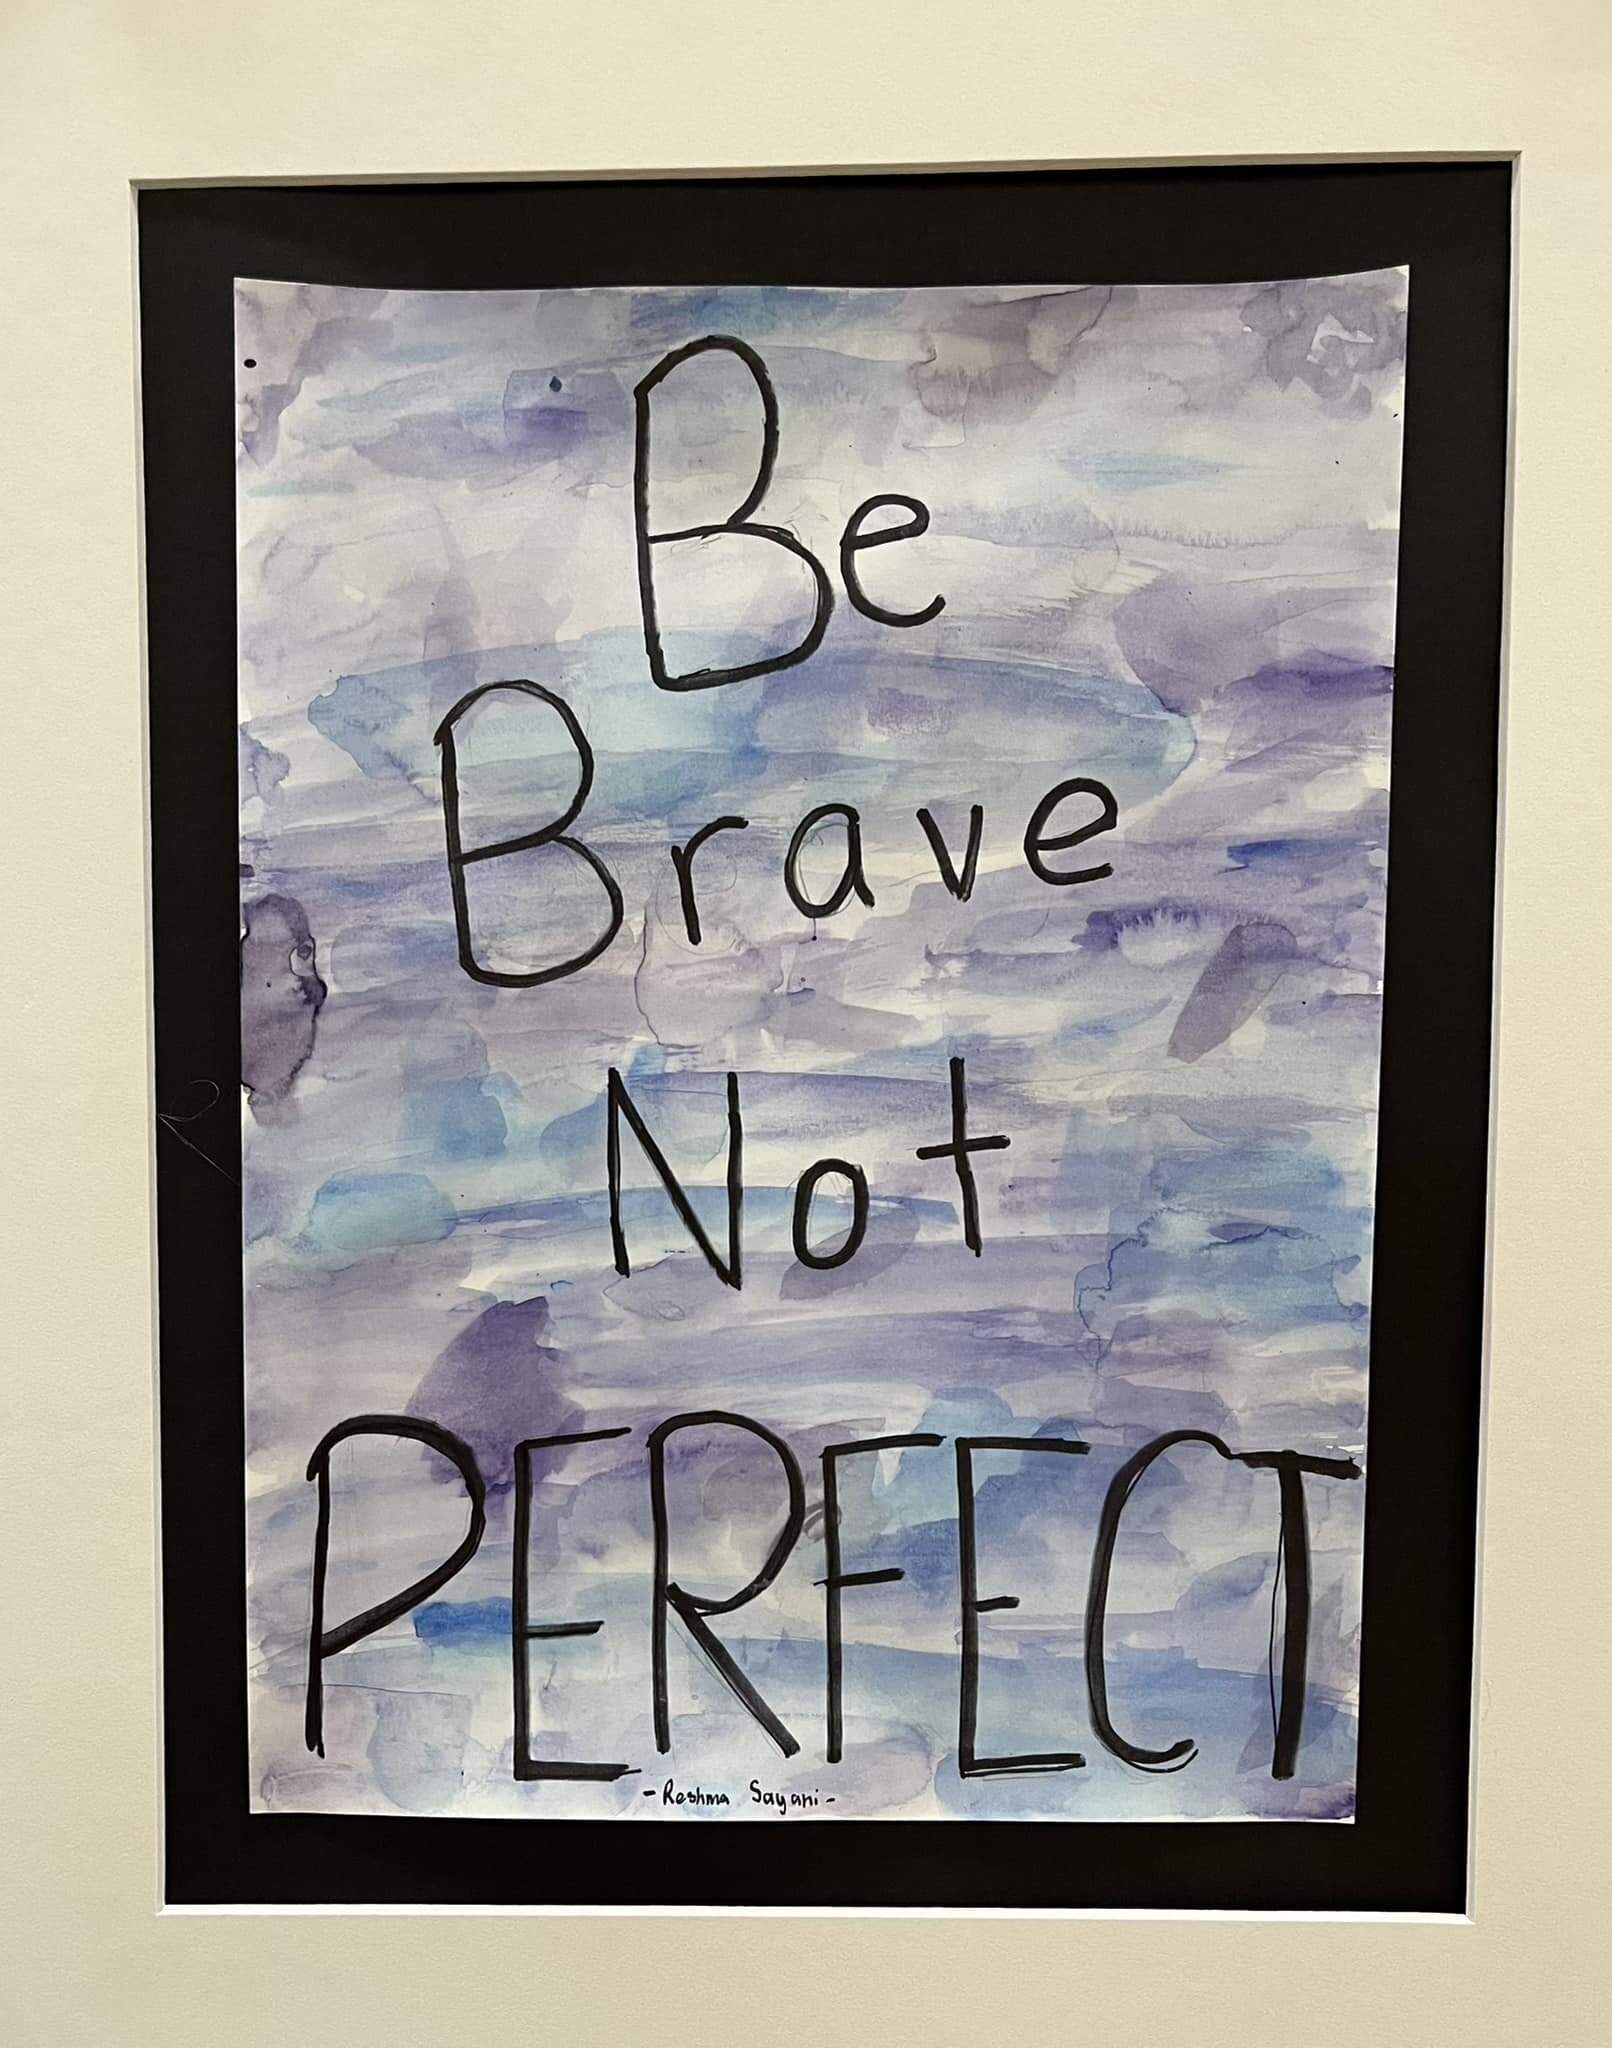 Happy Mental Health Monday 💚 We were blown away by the Mental Health Creative Showcase at Hidden Valley Middle School on Saturday! Here is just one example of a student&rsquo;s work 🤩